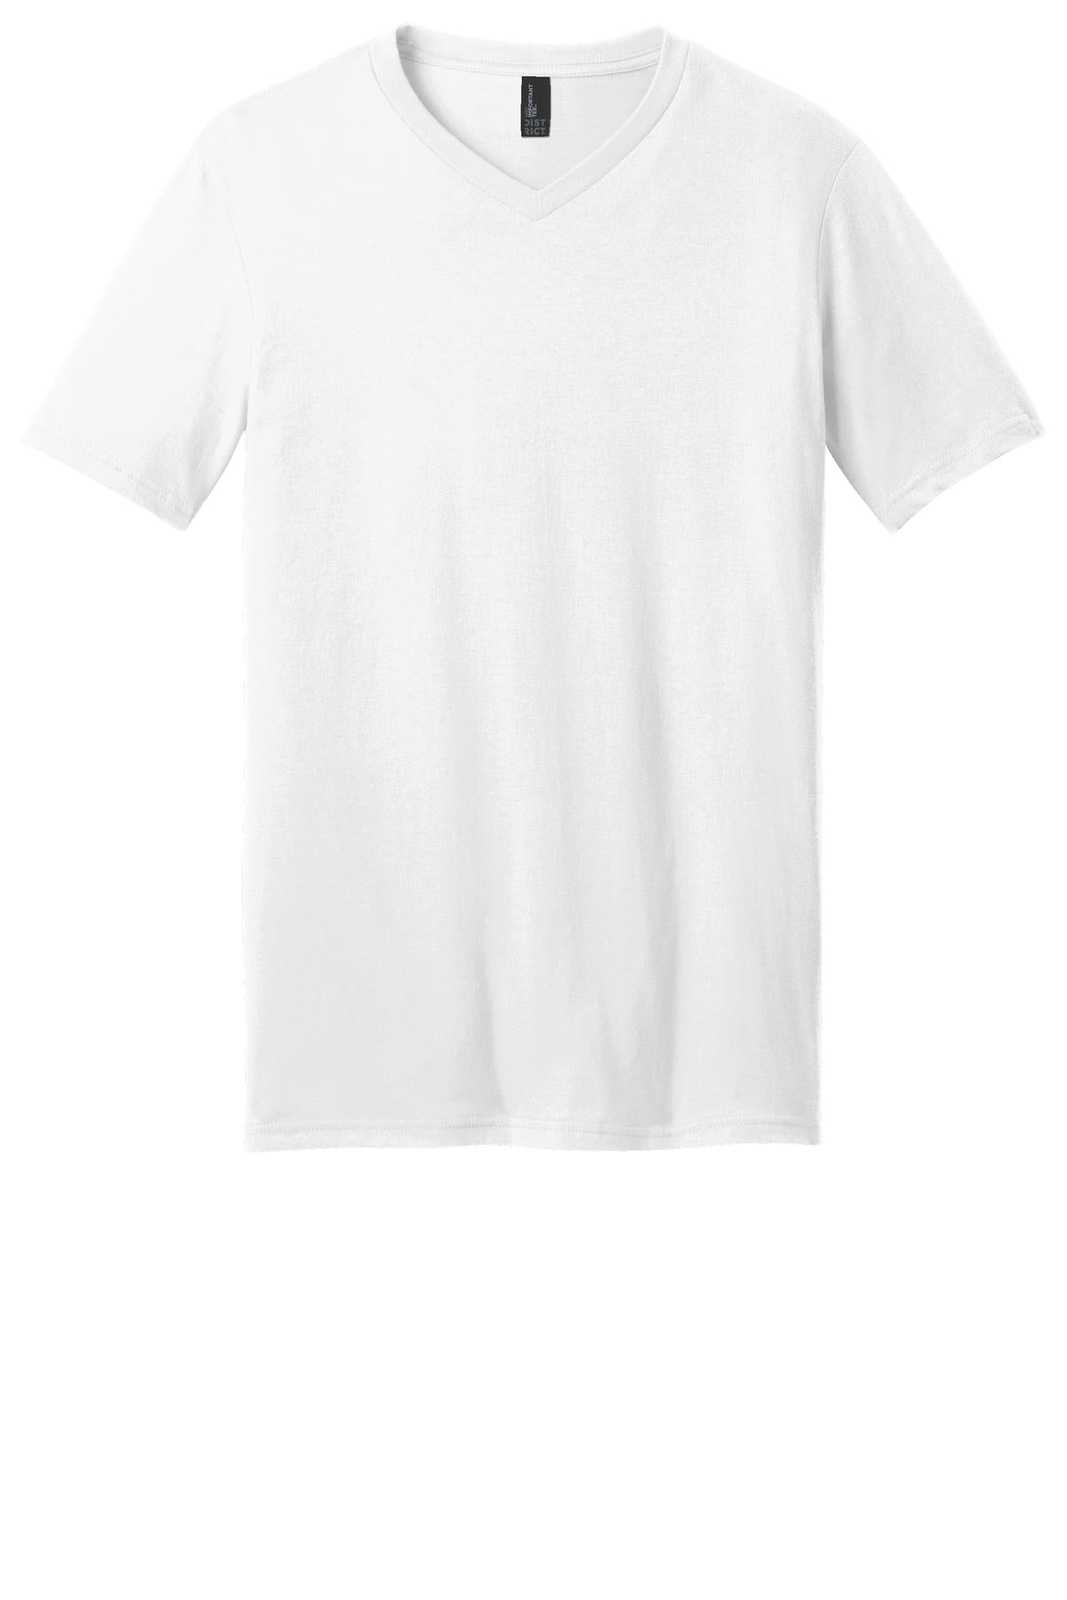 District DT6500 Very Important Tee V-Neck - White - HIT a Double - 5